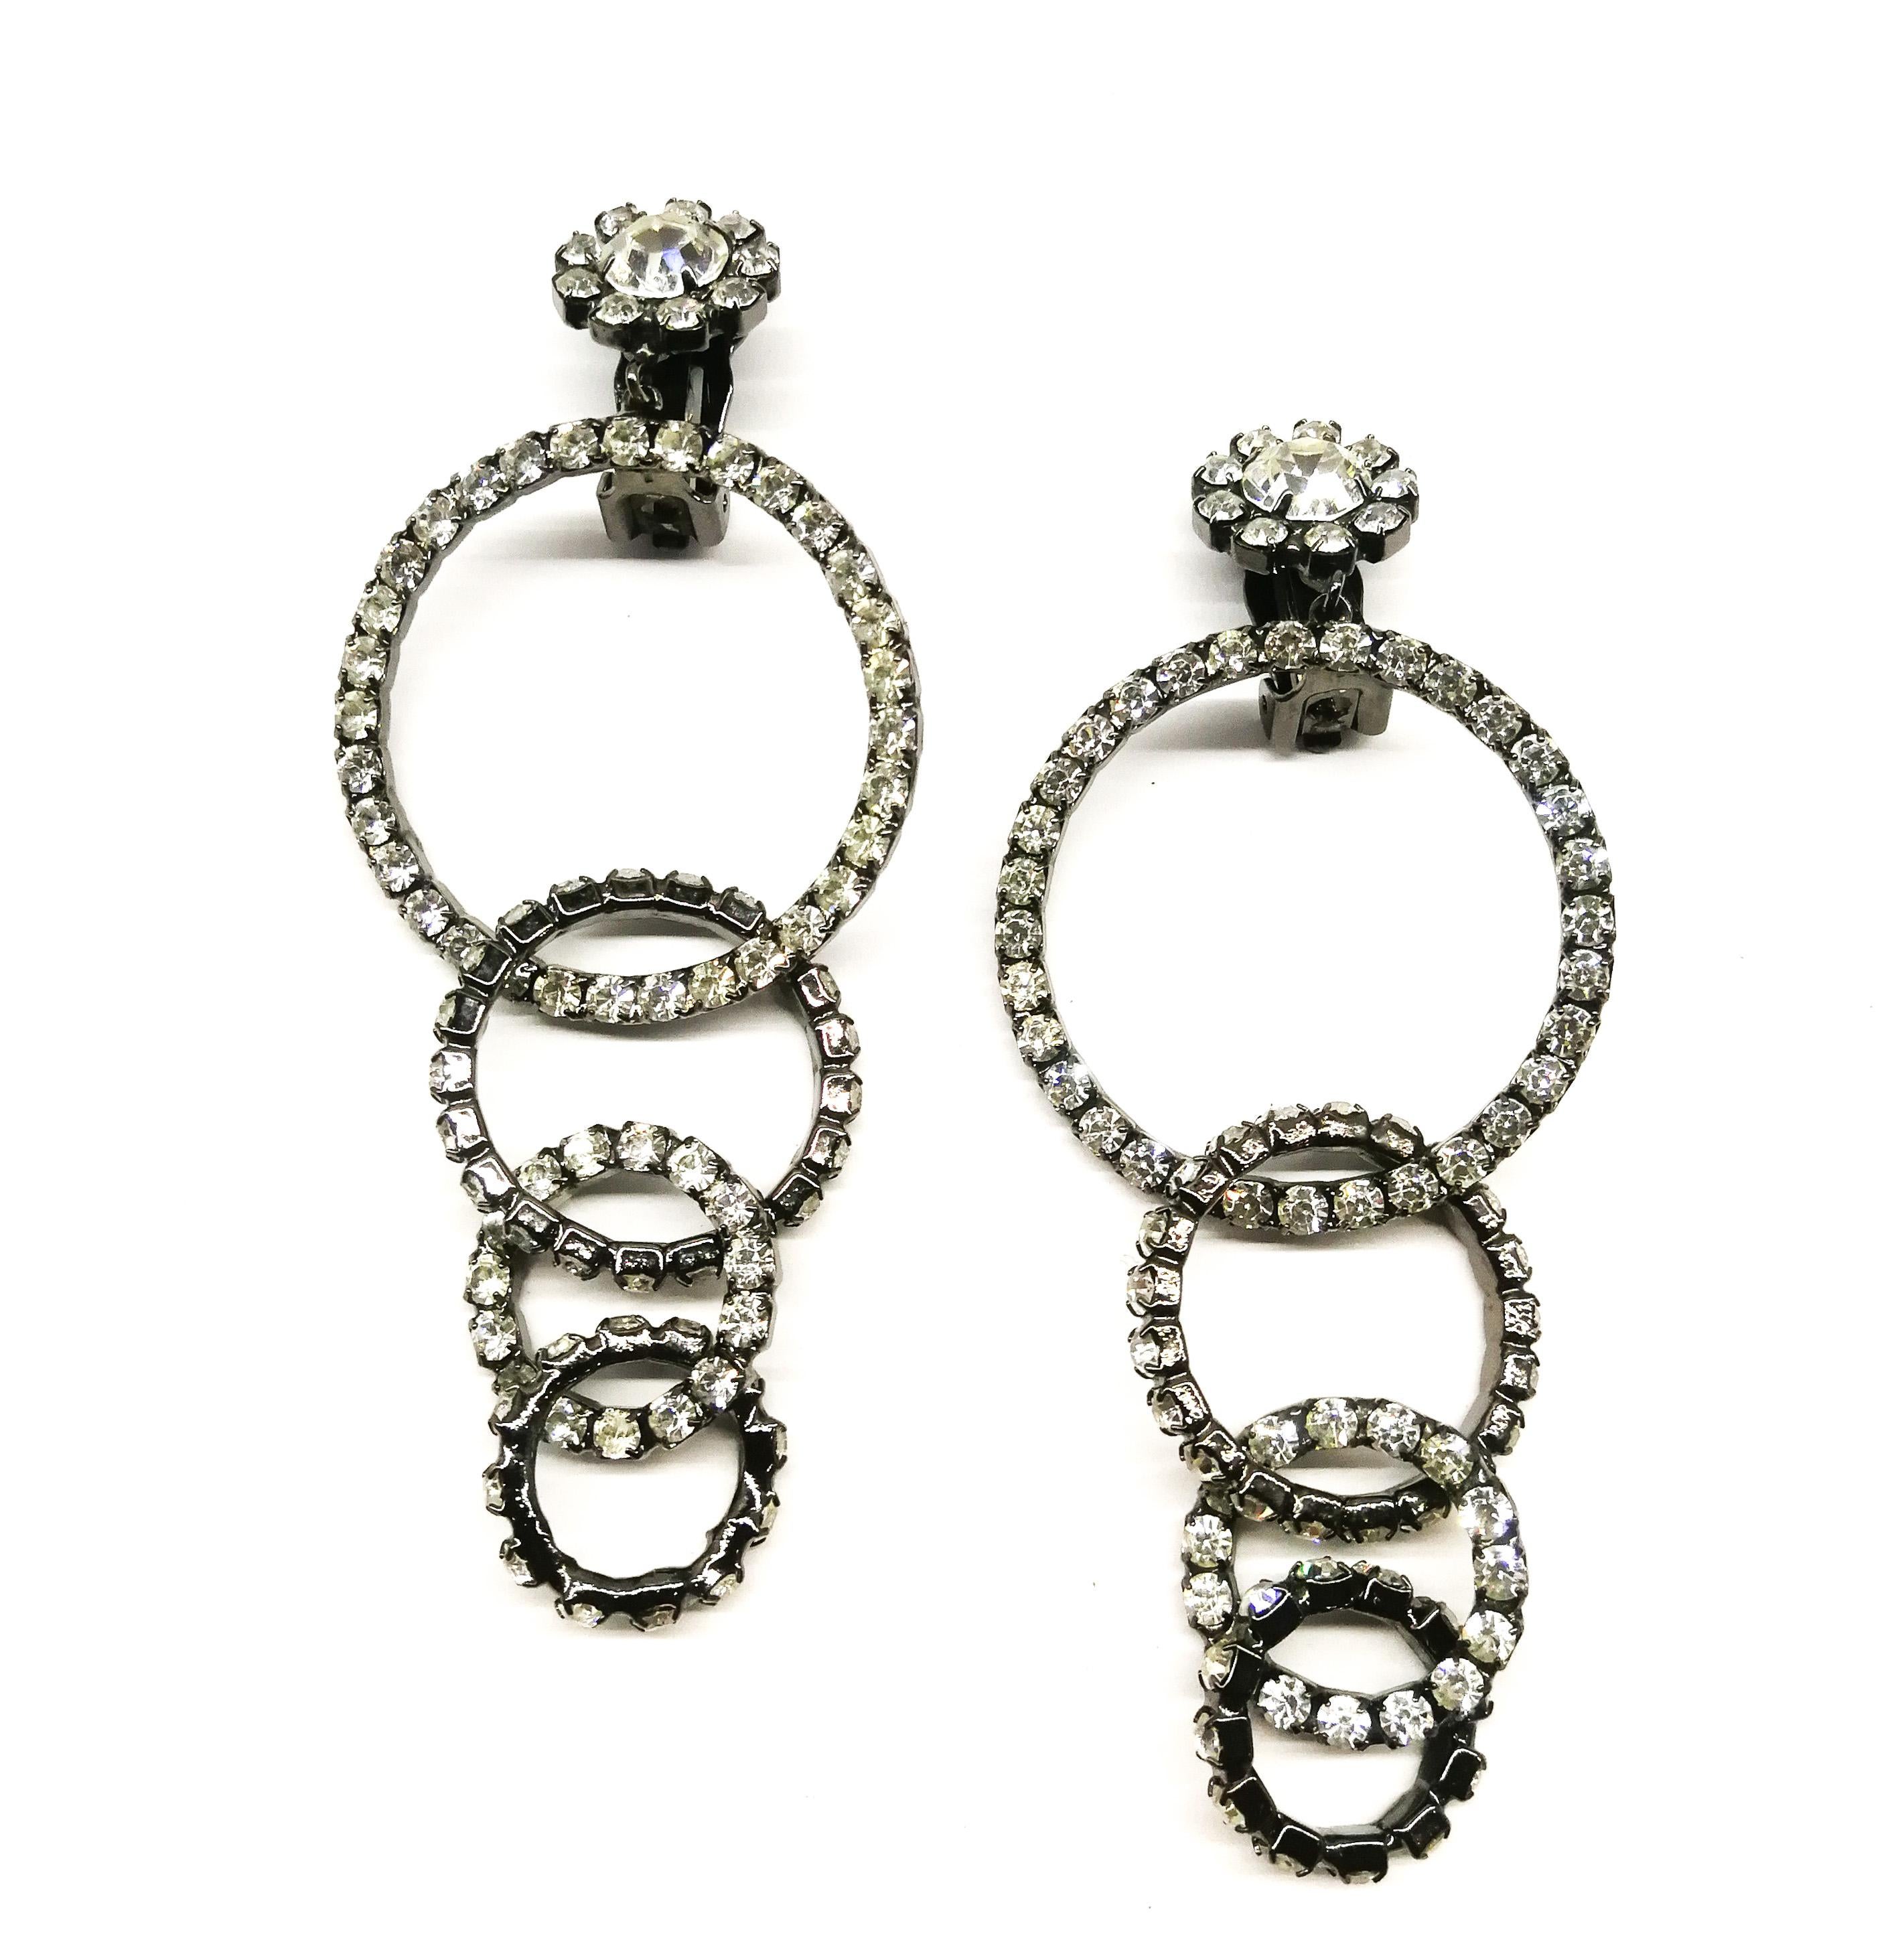 Striking and shoulder dusting interlocking hoop drop earrings, from a later Kenneth Jay Lane, of lovely quality and design, clear pastes set in a darkened grey metal. Both earrings are signed and are the perfect Seasonal gift or classic earrings for